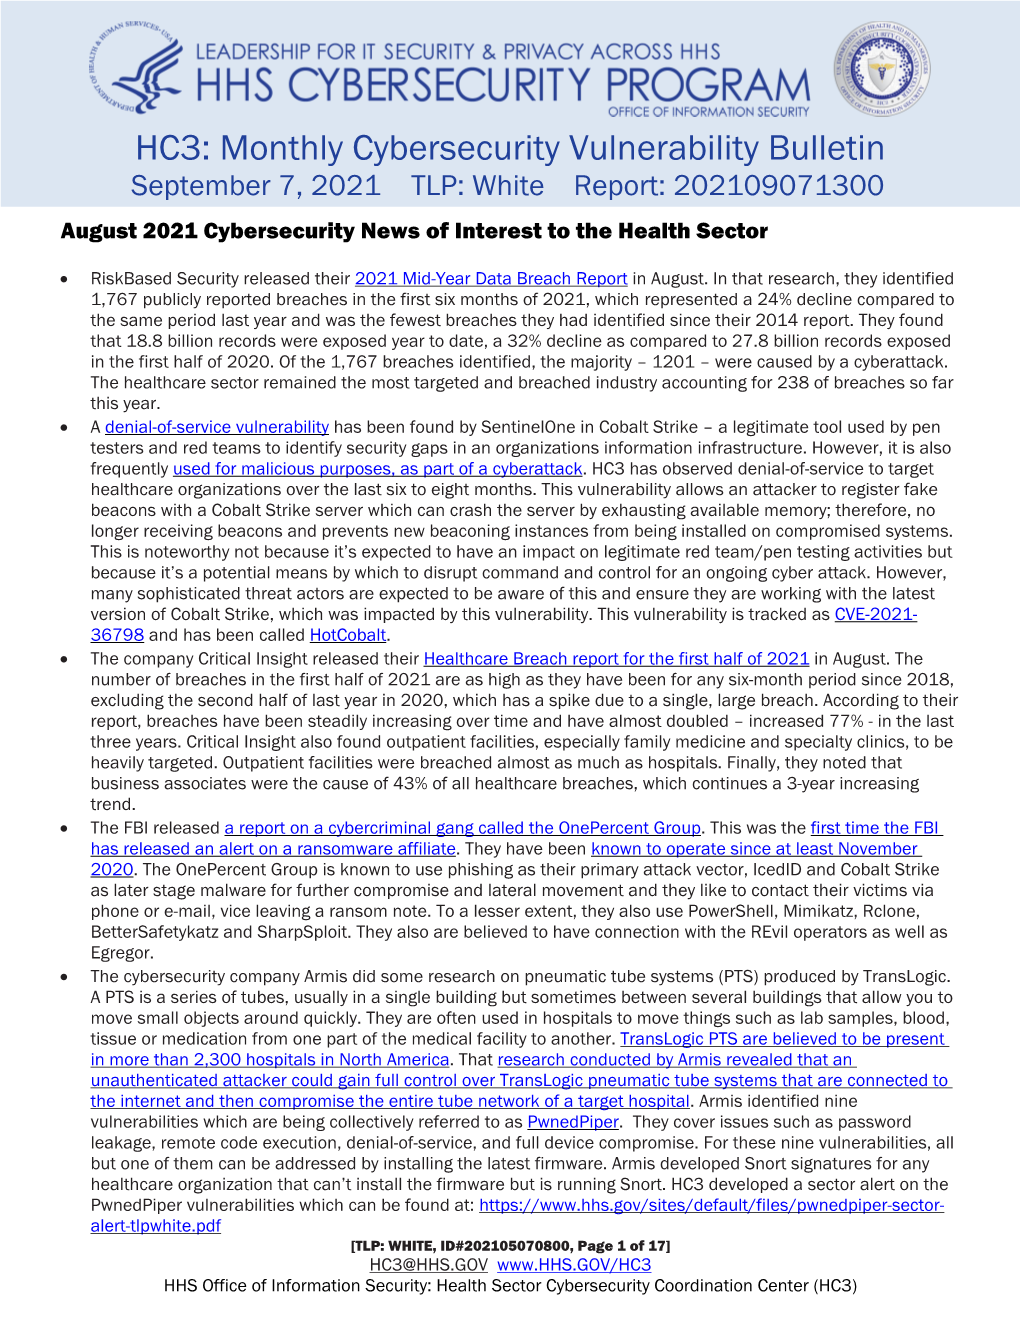 HC3: Monthly Cybersecurity Vulnerability Bulletin September 7, 2021 TLP: White Report: 202109071300 August 2021 Cybersecurity News of Interest to the Health Sector